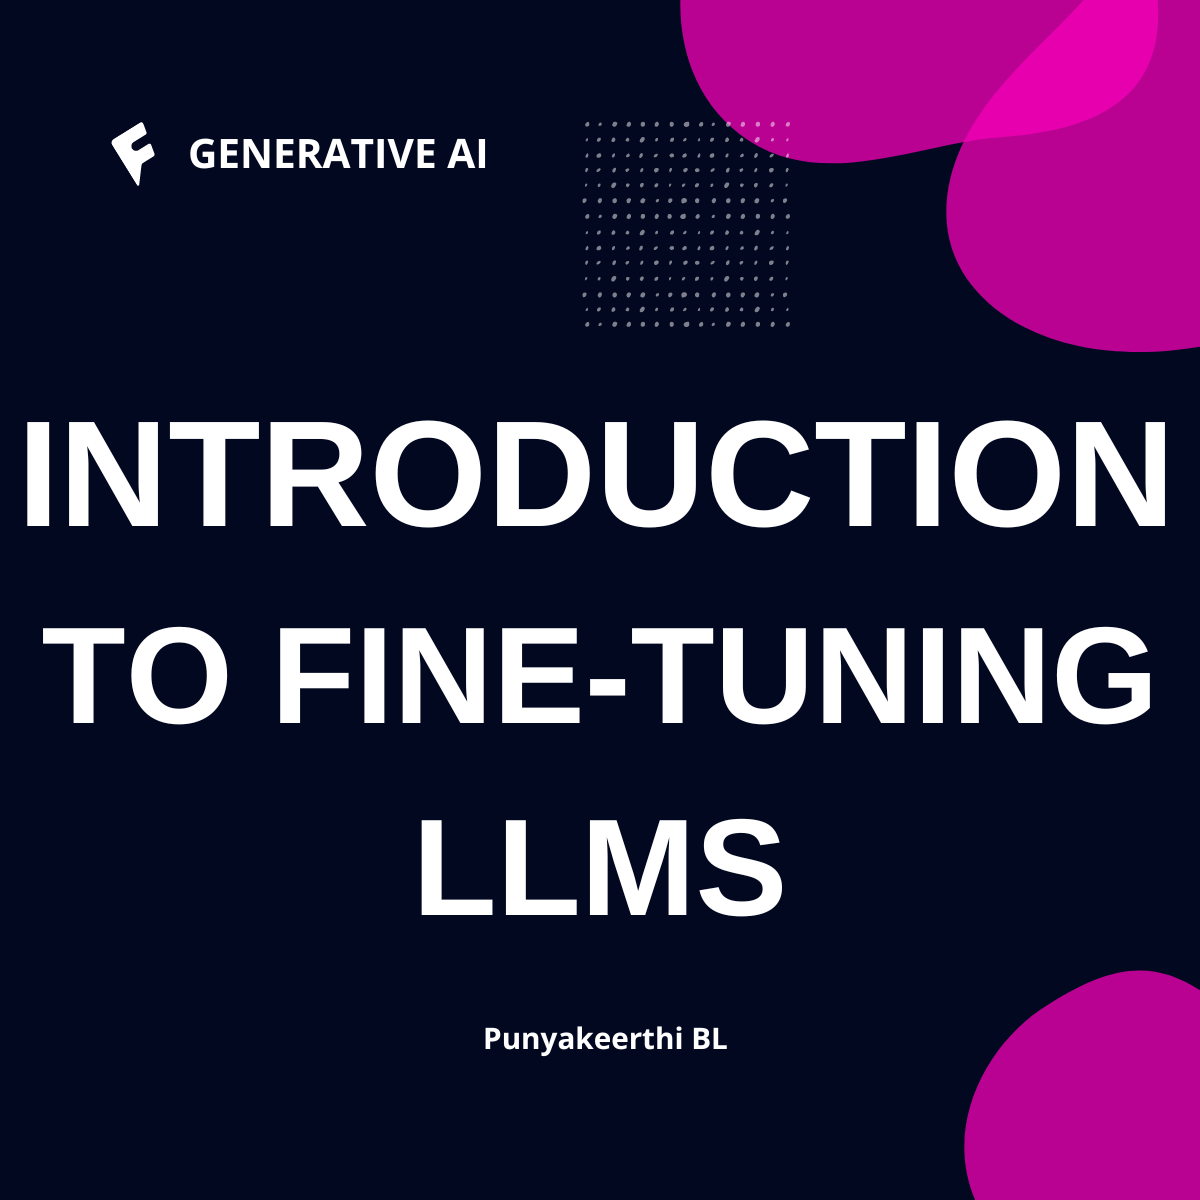 Introduction to Fine-Tuning LLMs